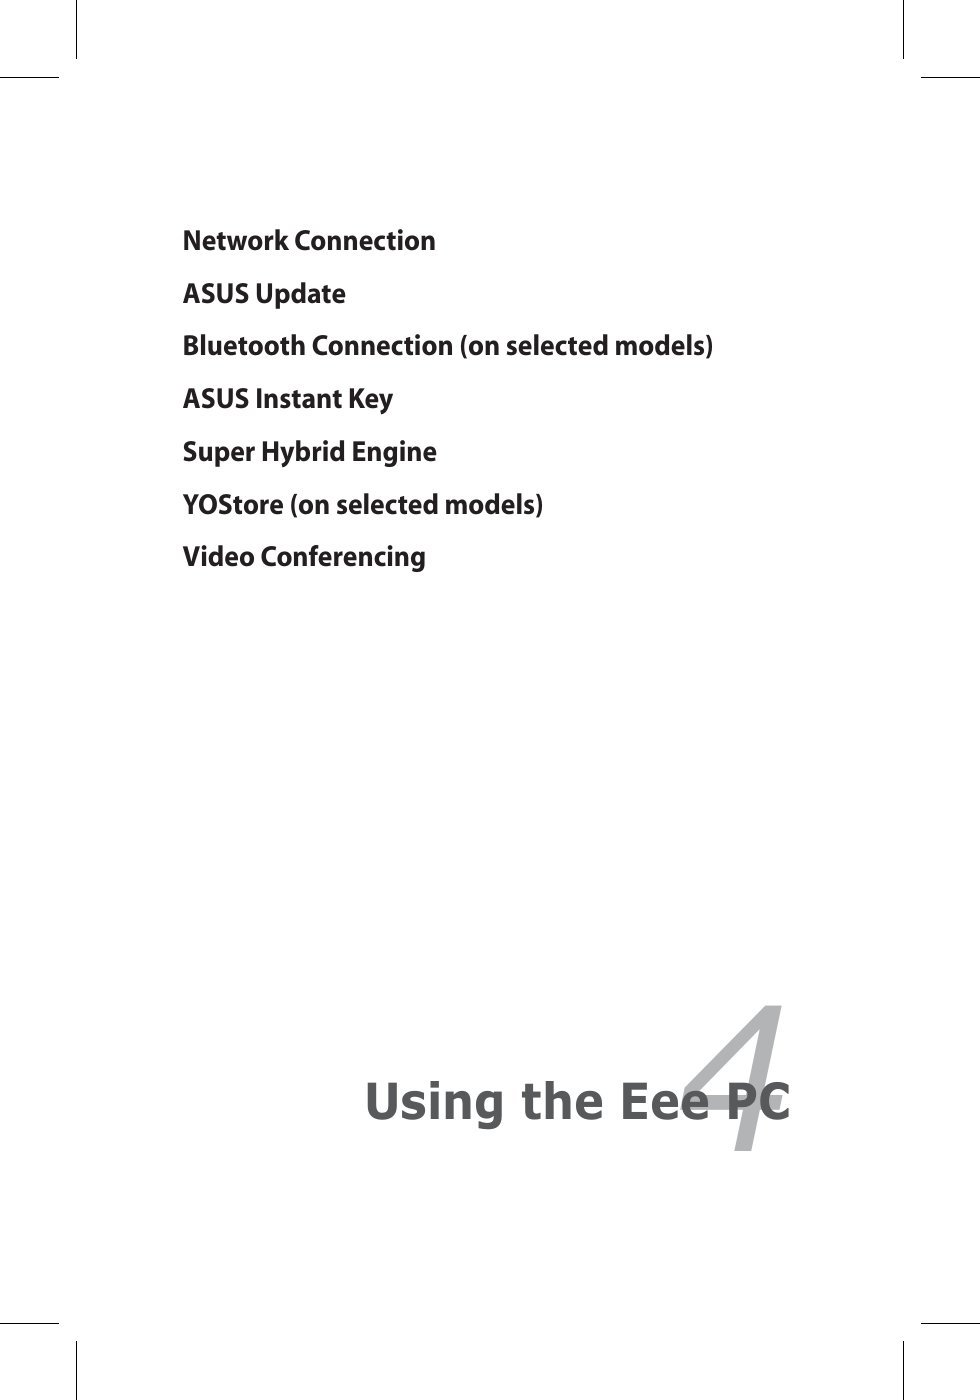 Network ConnectionASUS UpdateBluetooth Connection (on selected models)ASUS Instant KeySuper Hybrid EngineYOStore (on selected models)Video Conferencing4Using the Eee PC